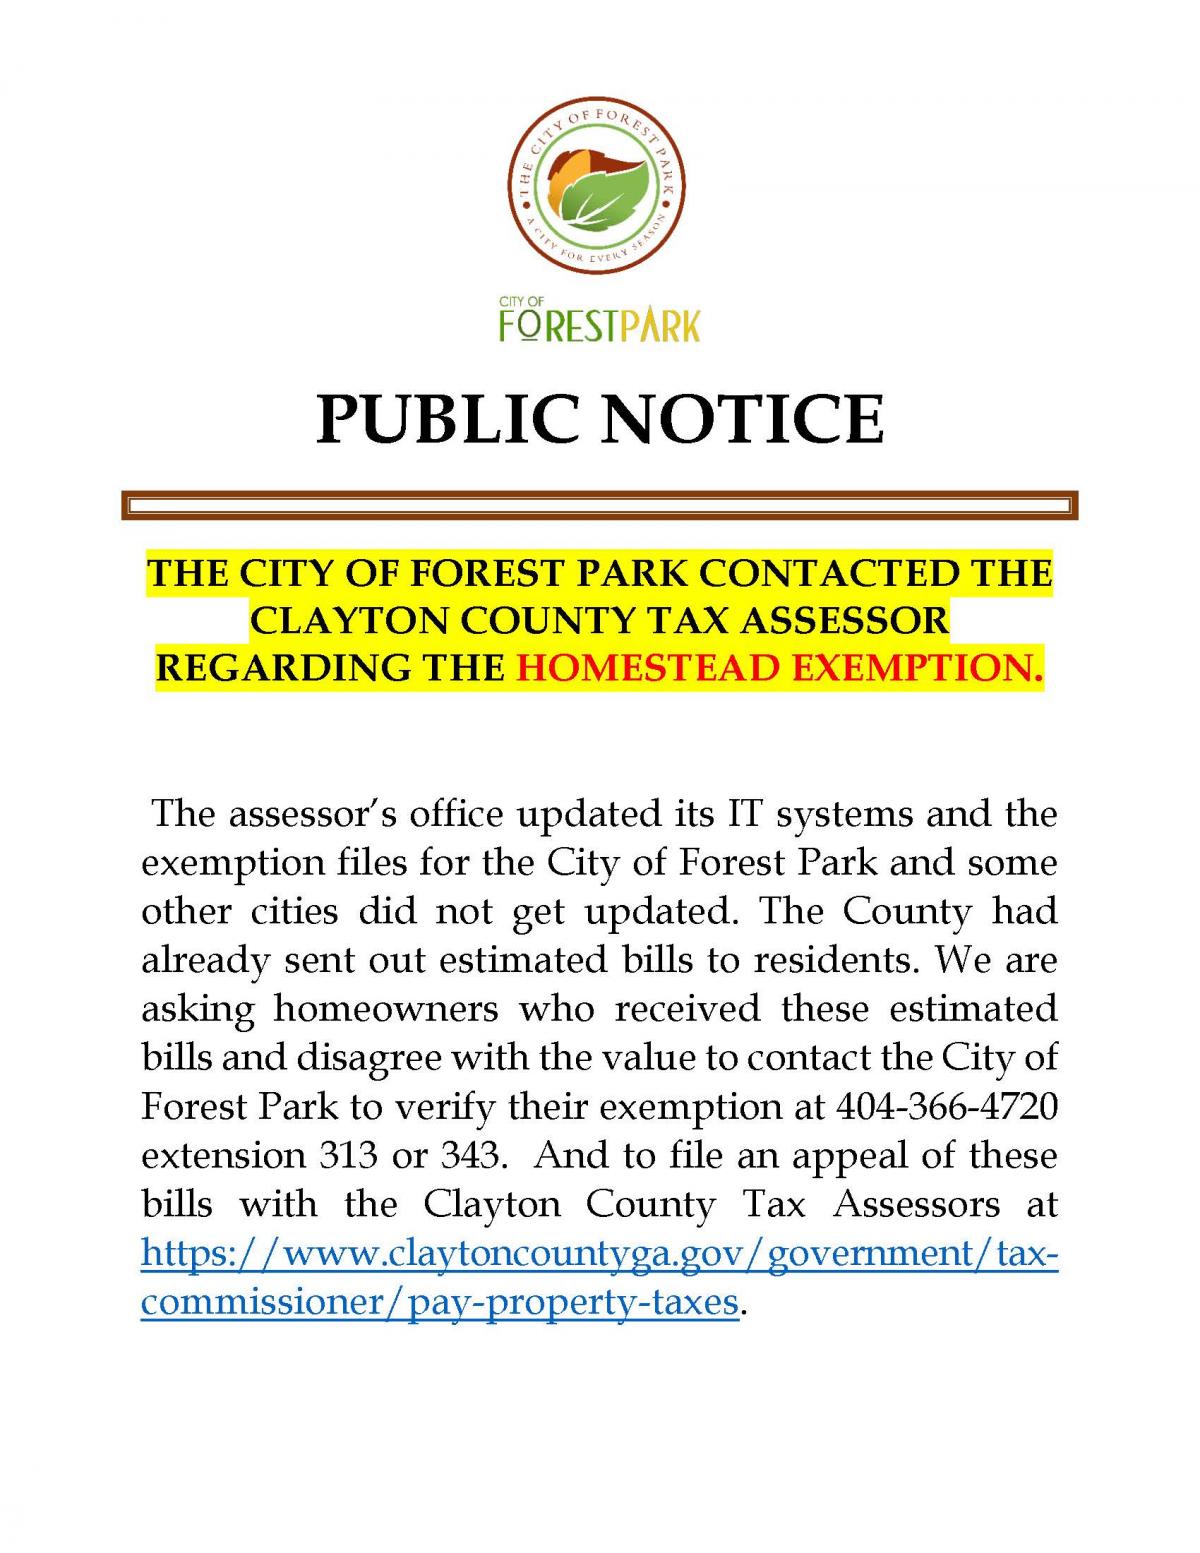 THE CITY OF FOREST PARK CONTACTED THE CLAYTON COUNTY TAX ASSESSOR REGARDING THE HOMESTEAD EXEMPTION.